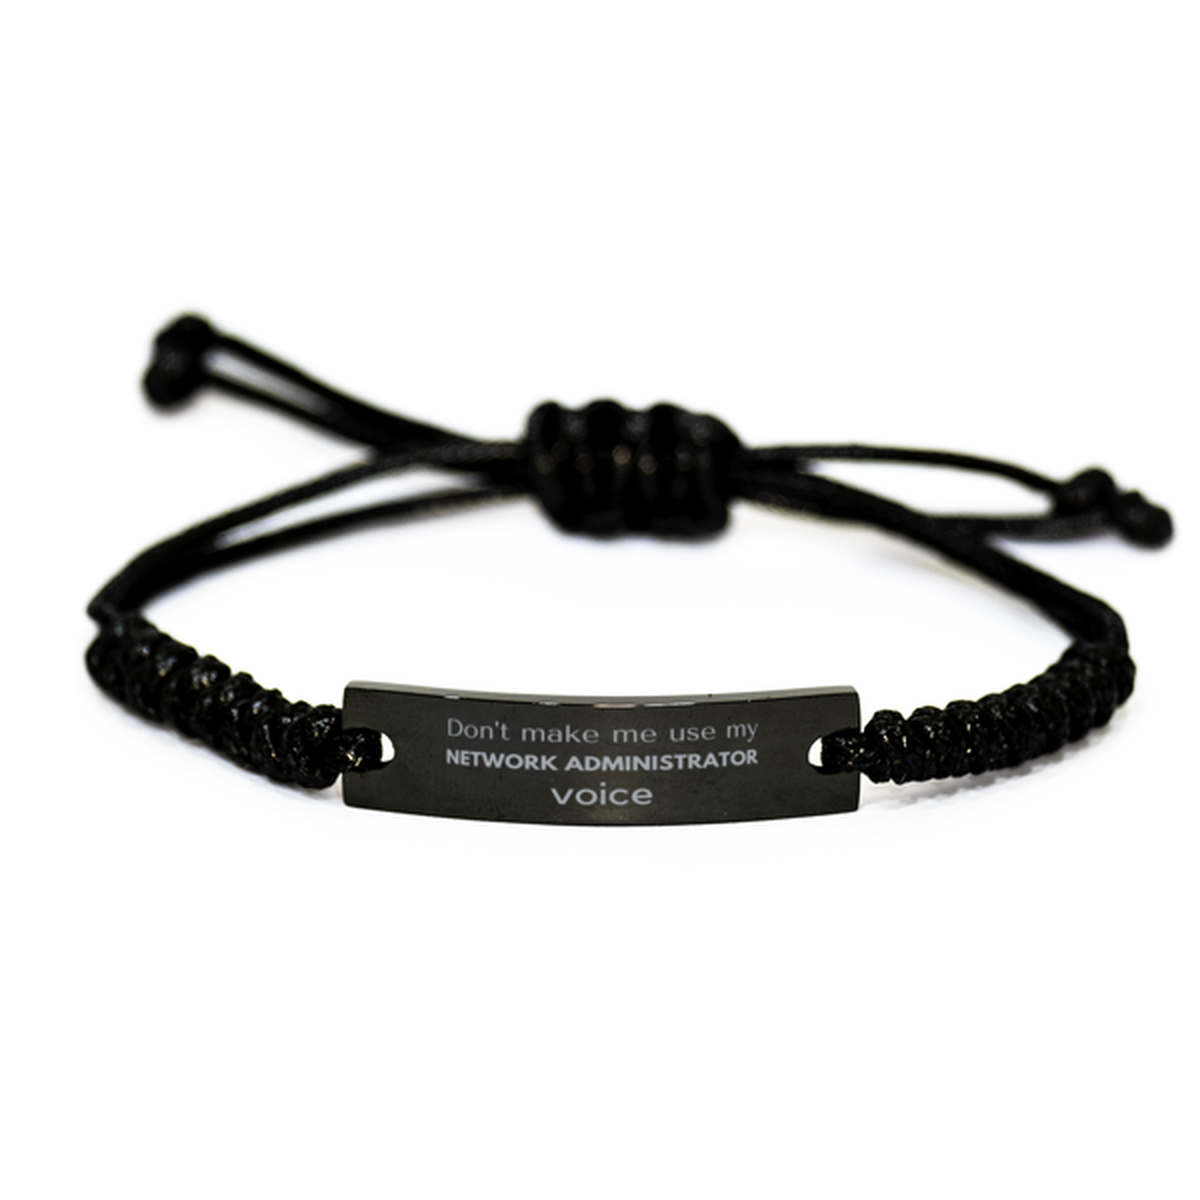 Don't make me use my Network Administrator voice, Sarcasm Network Administrator Gifts, Christmas Network Administrator Black Rope Bracelet Birthday Unique Gifts For Network Administrator Coworkers, Men, Women, Colleague, Friends